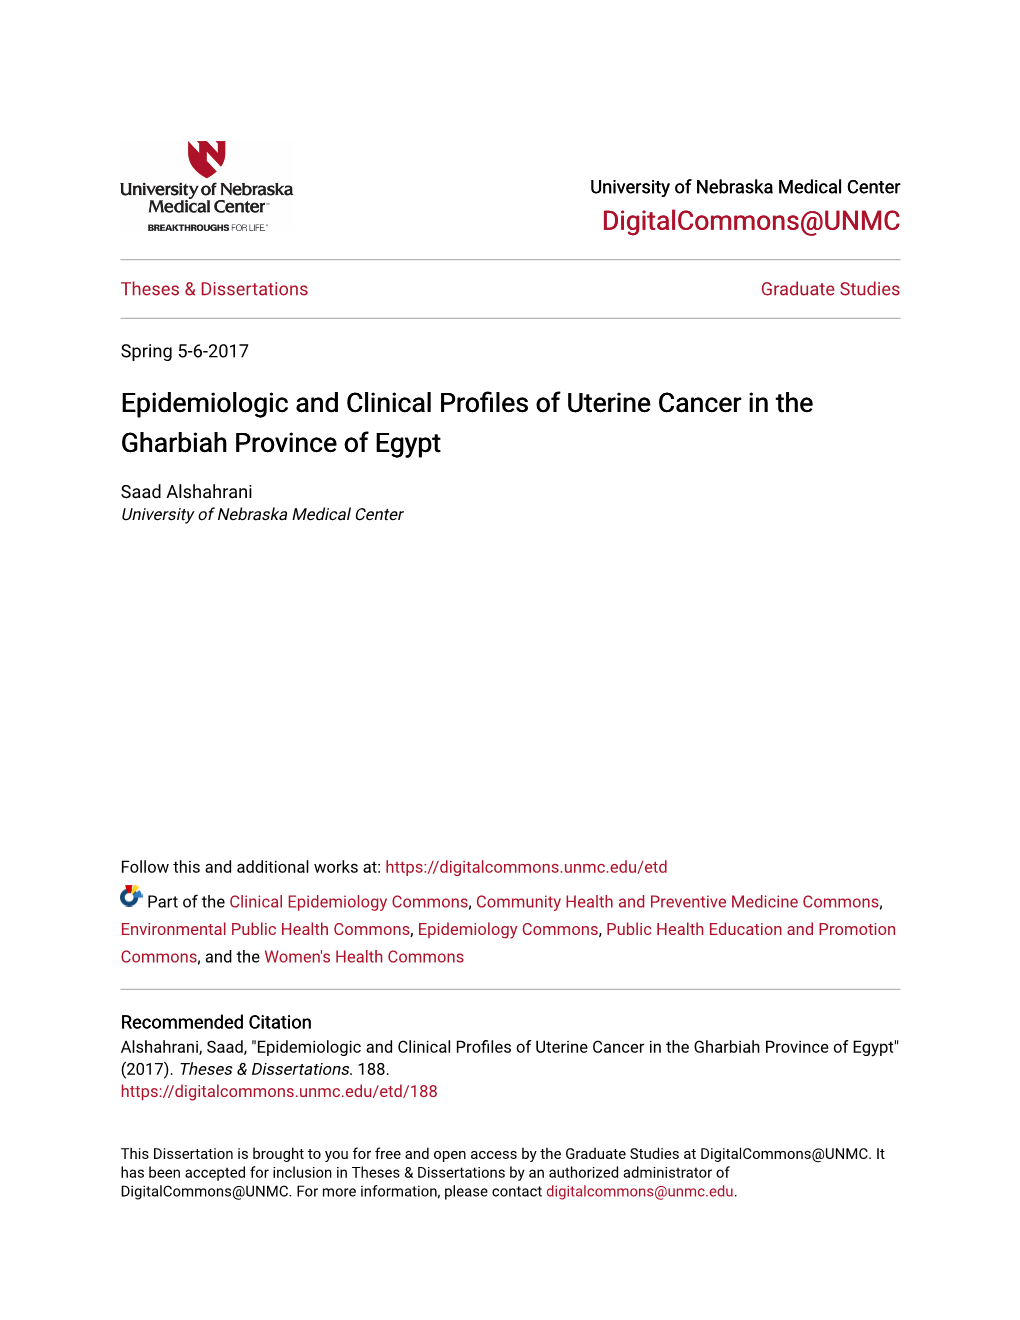 Epidemiologic and Clinical Profiles of Uterine Cancer in the Gharbiah Province of Egypt